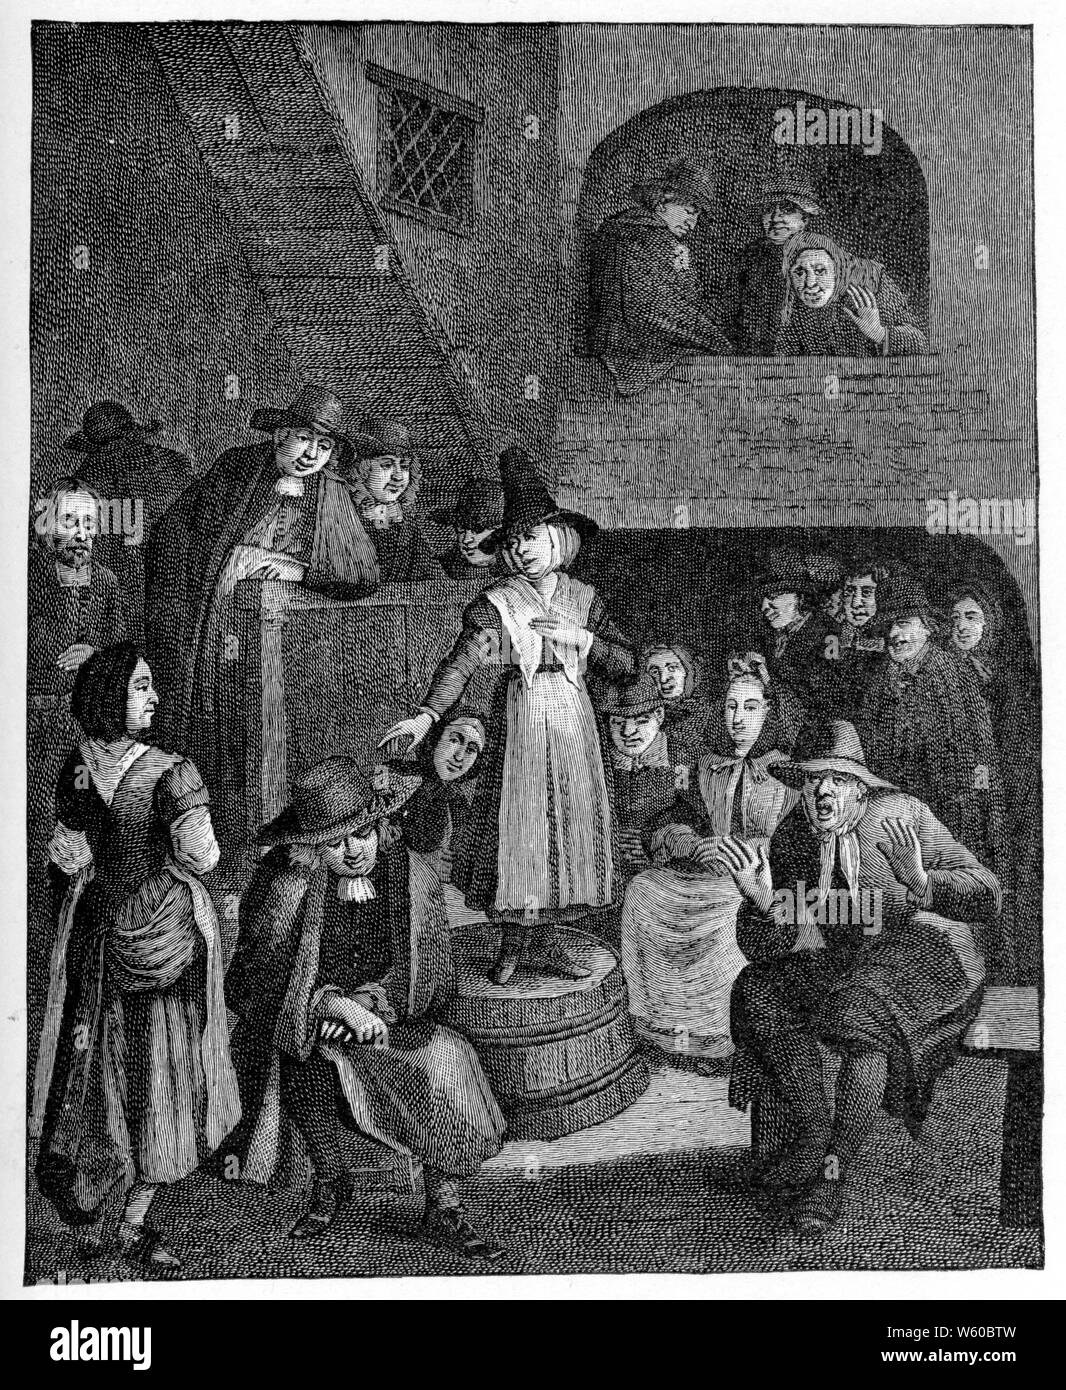 A Quakers' Meeting, in the 17th century. After Marcel Lauron. Quakers, also called Friends, are a historically Christian group whose formal name is the Religious Society of Friends. Stock Photo